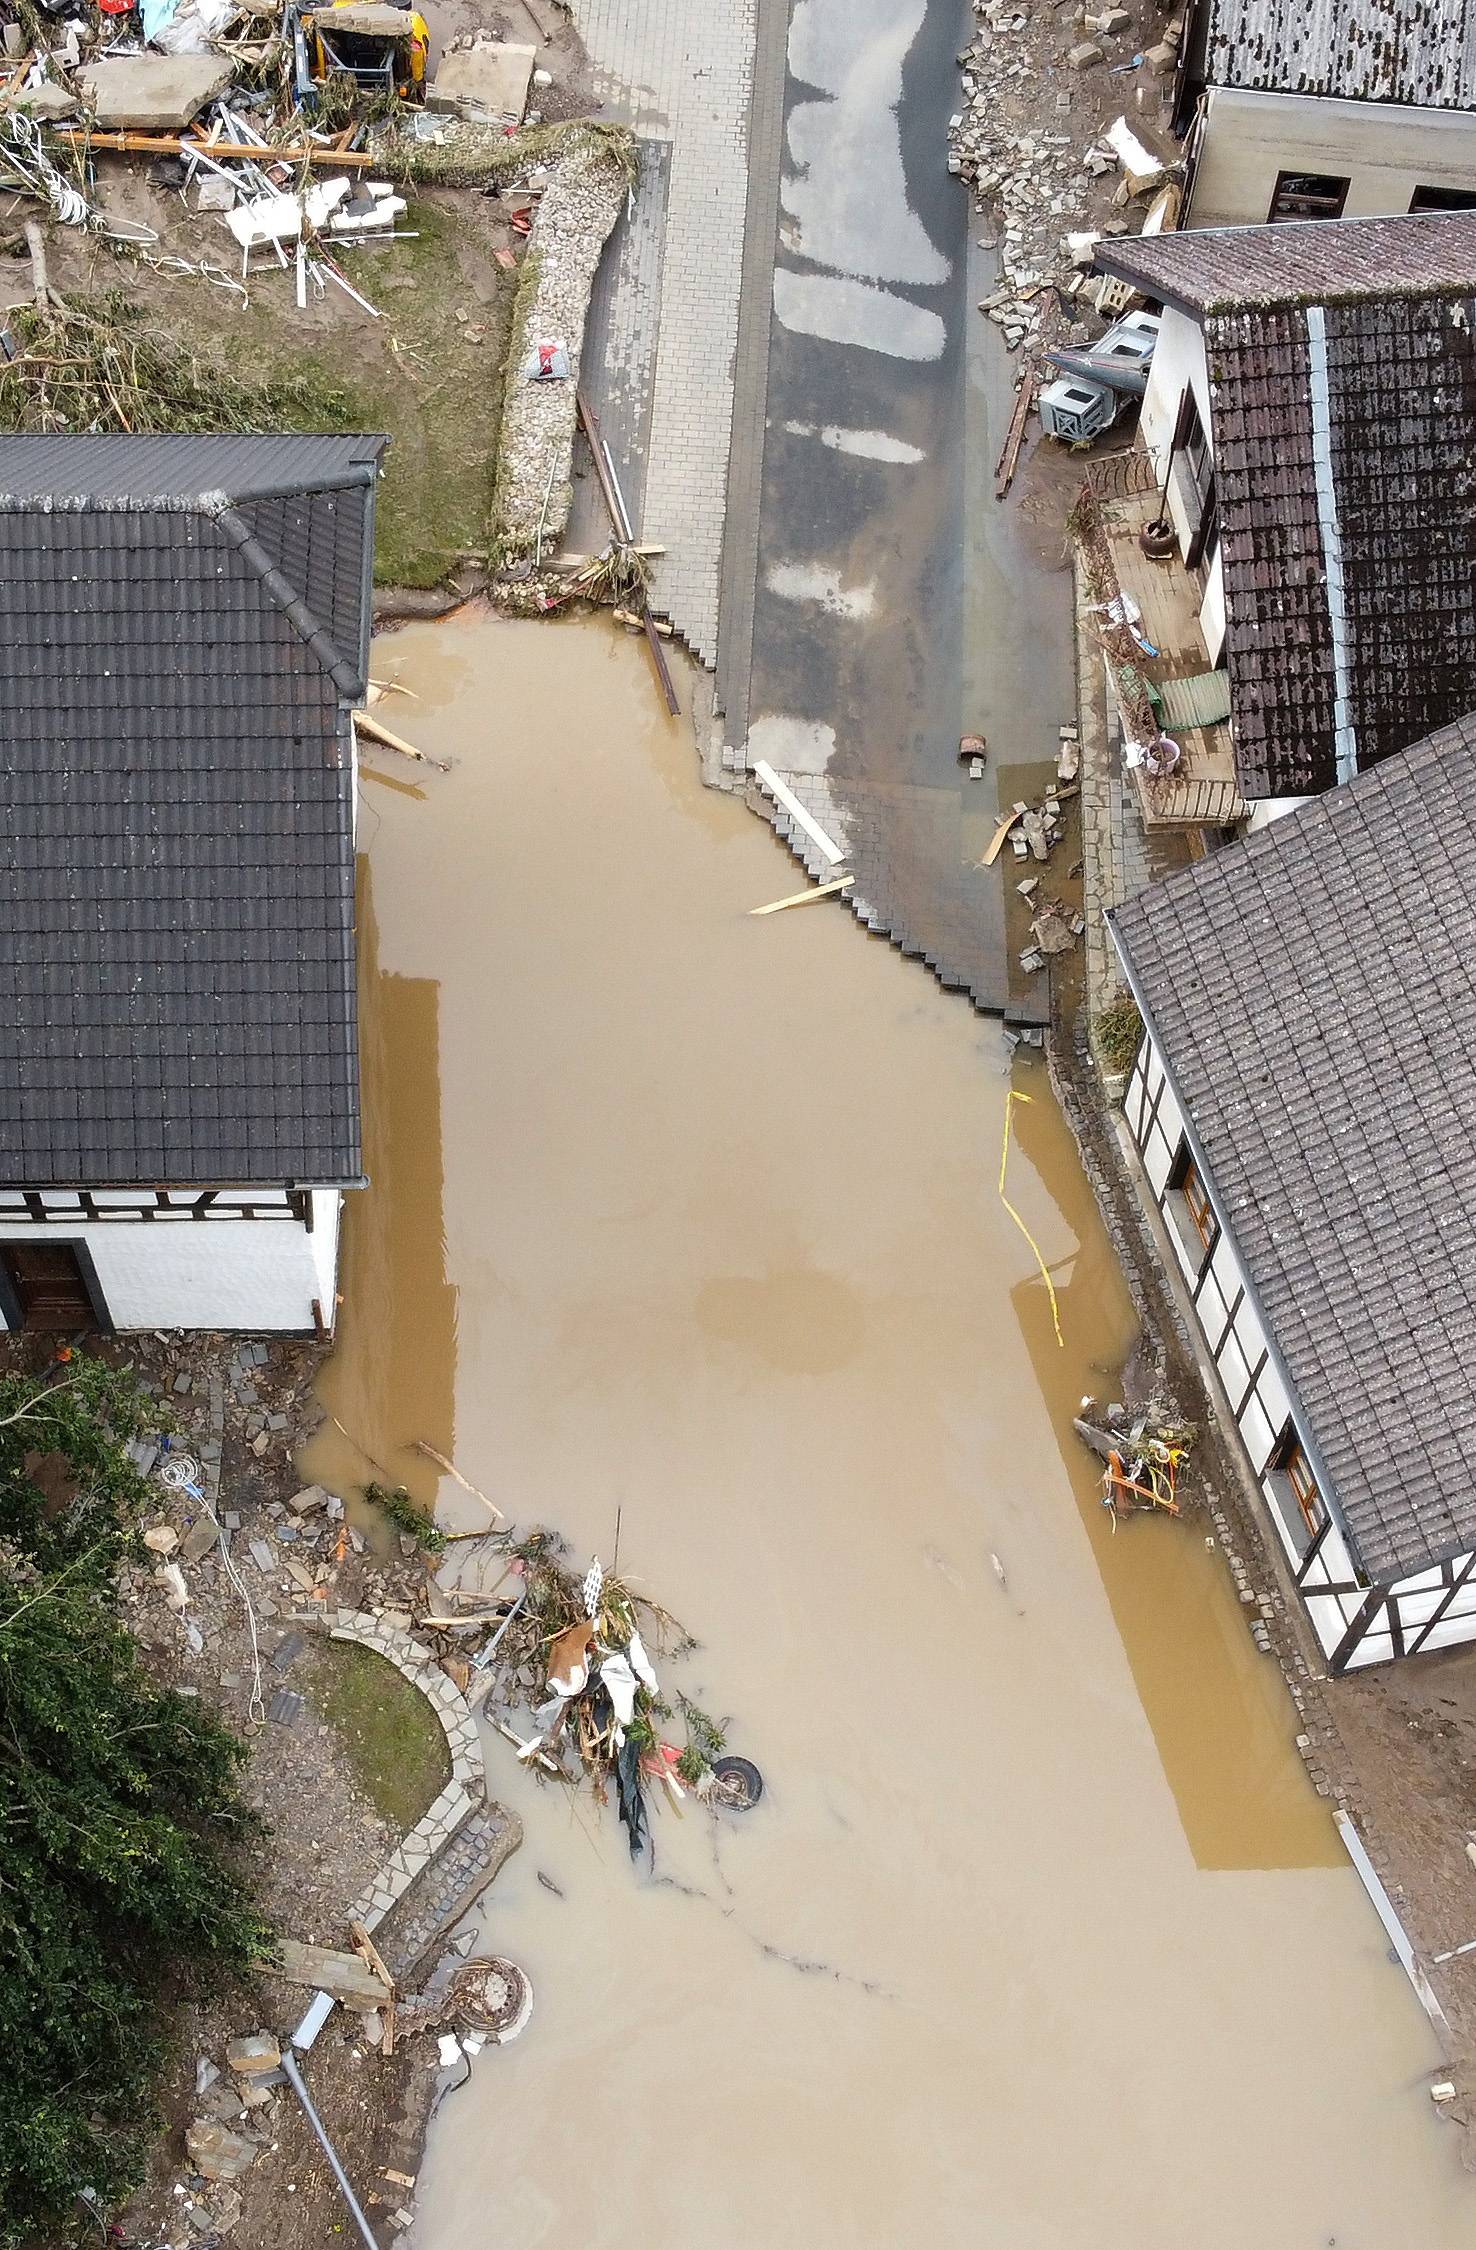 A general view of flood-affected area following heavy rainfalls in Schuld